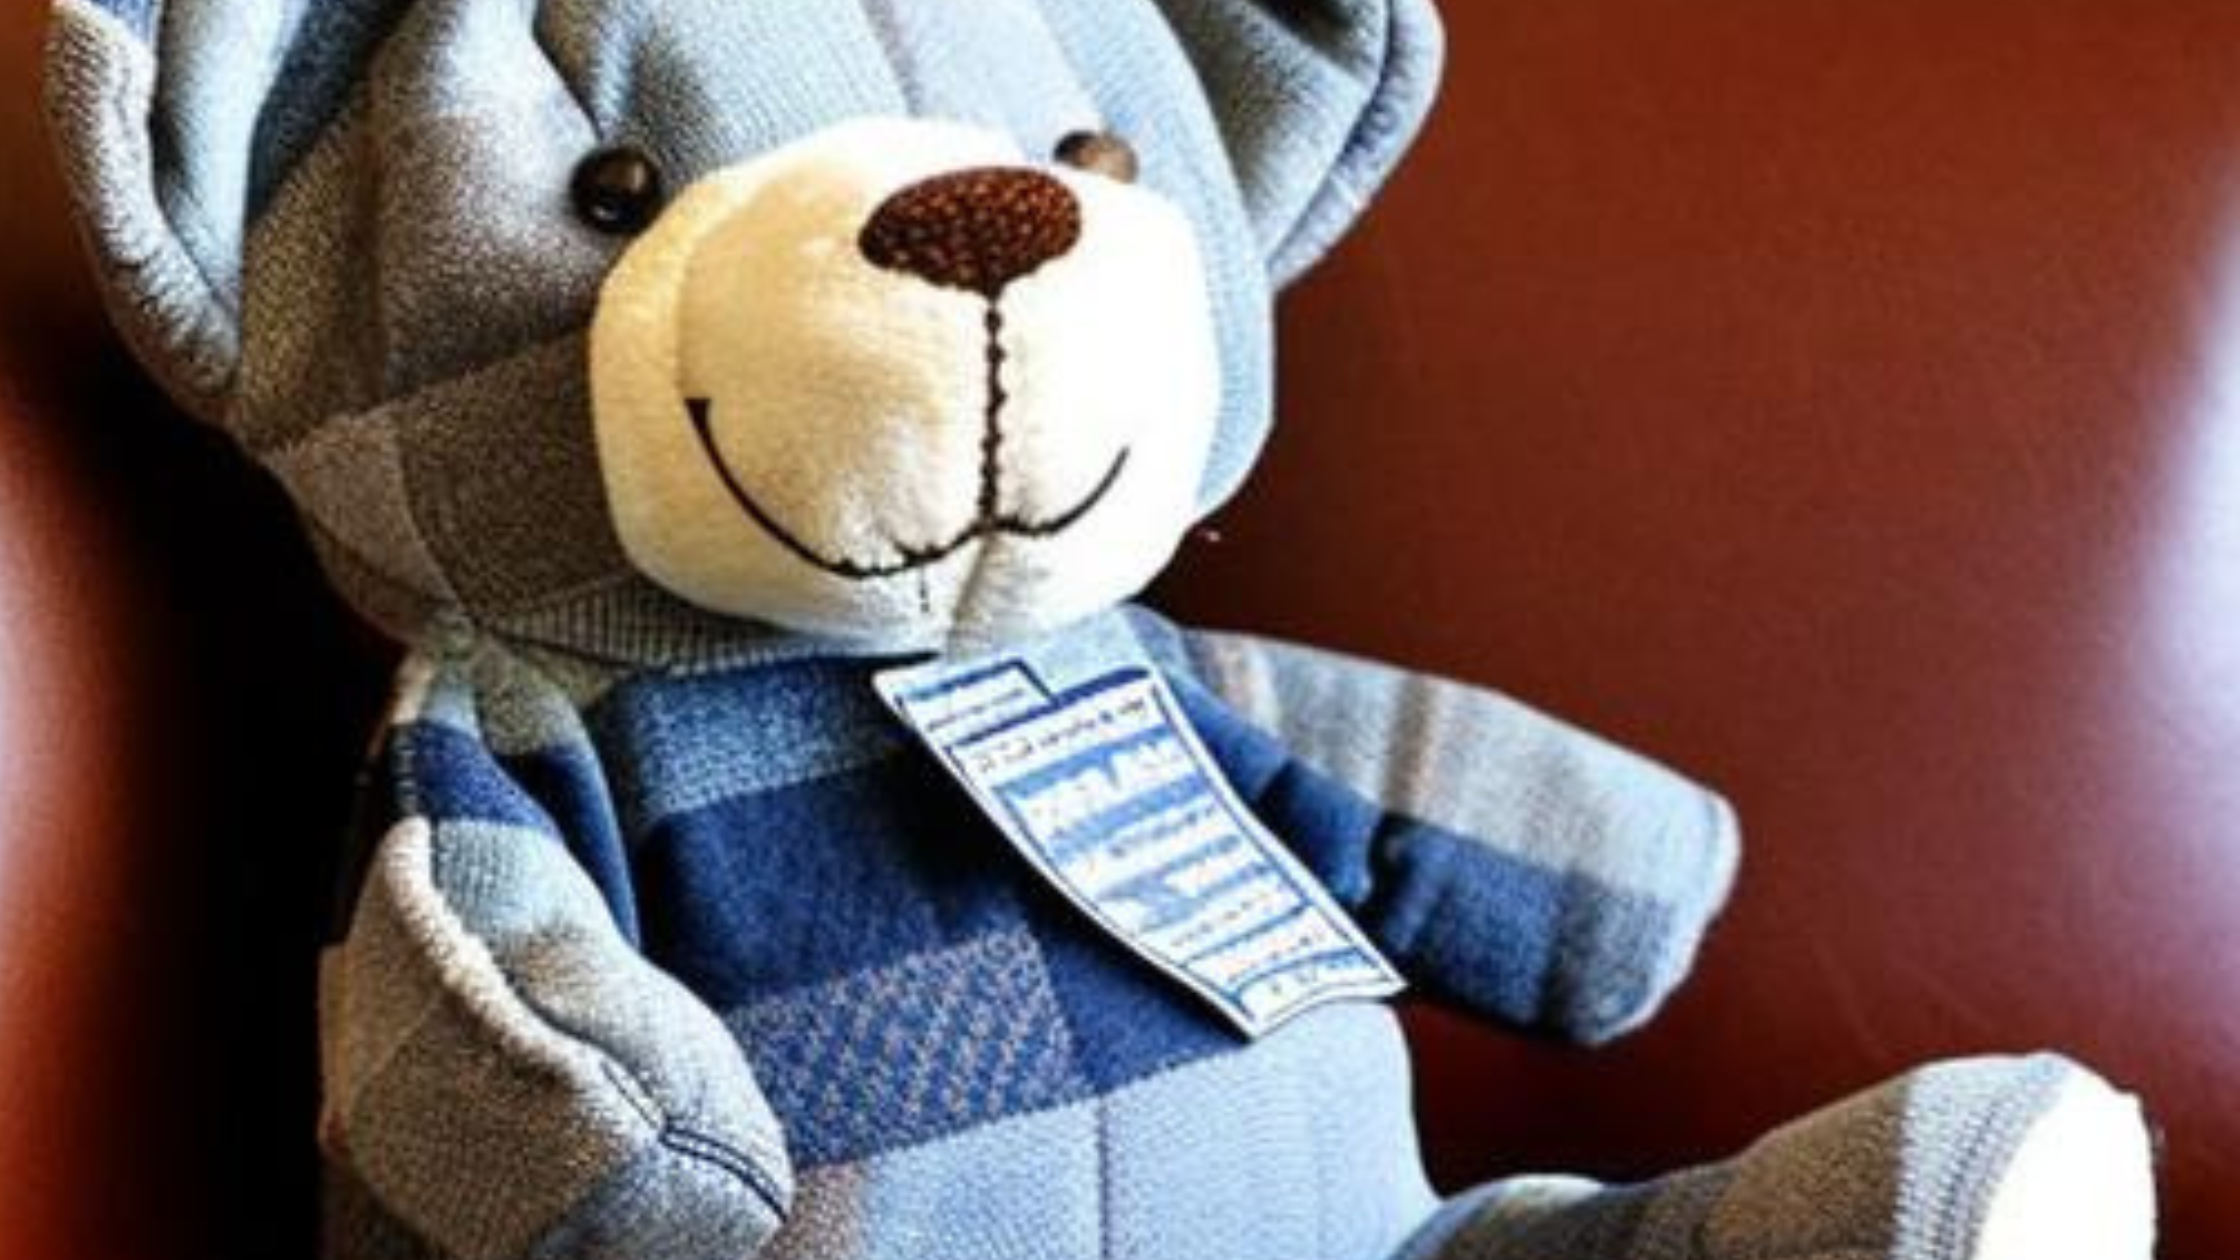 Custom, hand-made bear made from departed's clothing.